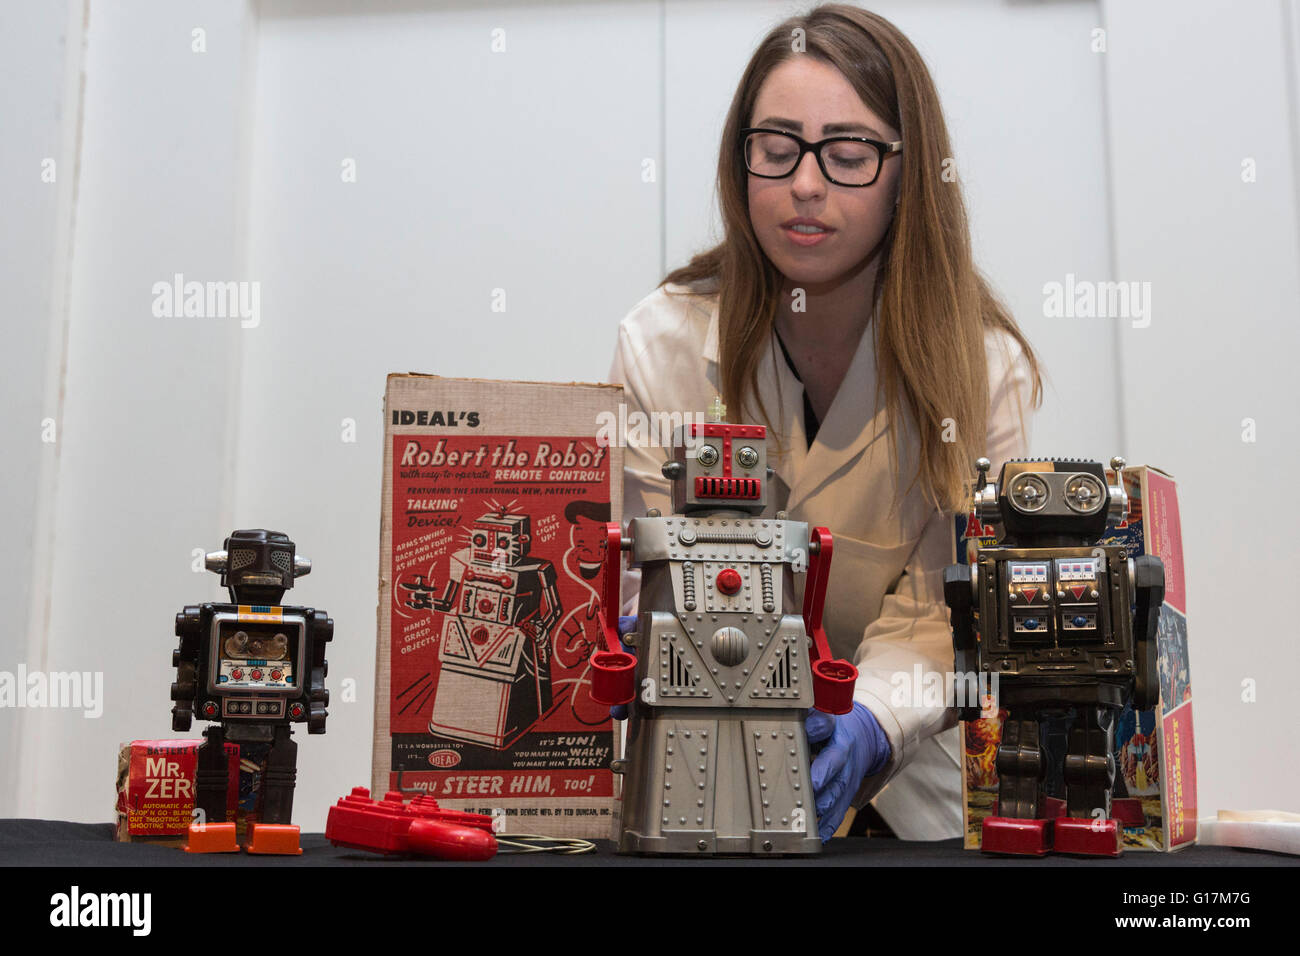 London, UK. 10 May 2016. Pictured: conservator Vanessa Applebaum handles toy robots L-R: Mr Zero, Robert the Robot and the Super Astronaut Robot. The London Science Museum announces Rise of the Robots, the remarkable 500-year history of robots, in a new exhibition starting February 2017. Over 100 robots will feature in the exhibition which makes it the most significant collection of humanoid robots ever displayed in the world. Stock Photo